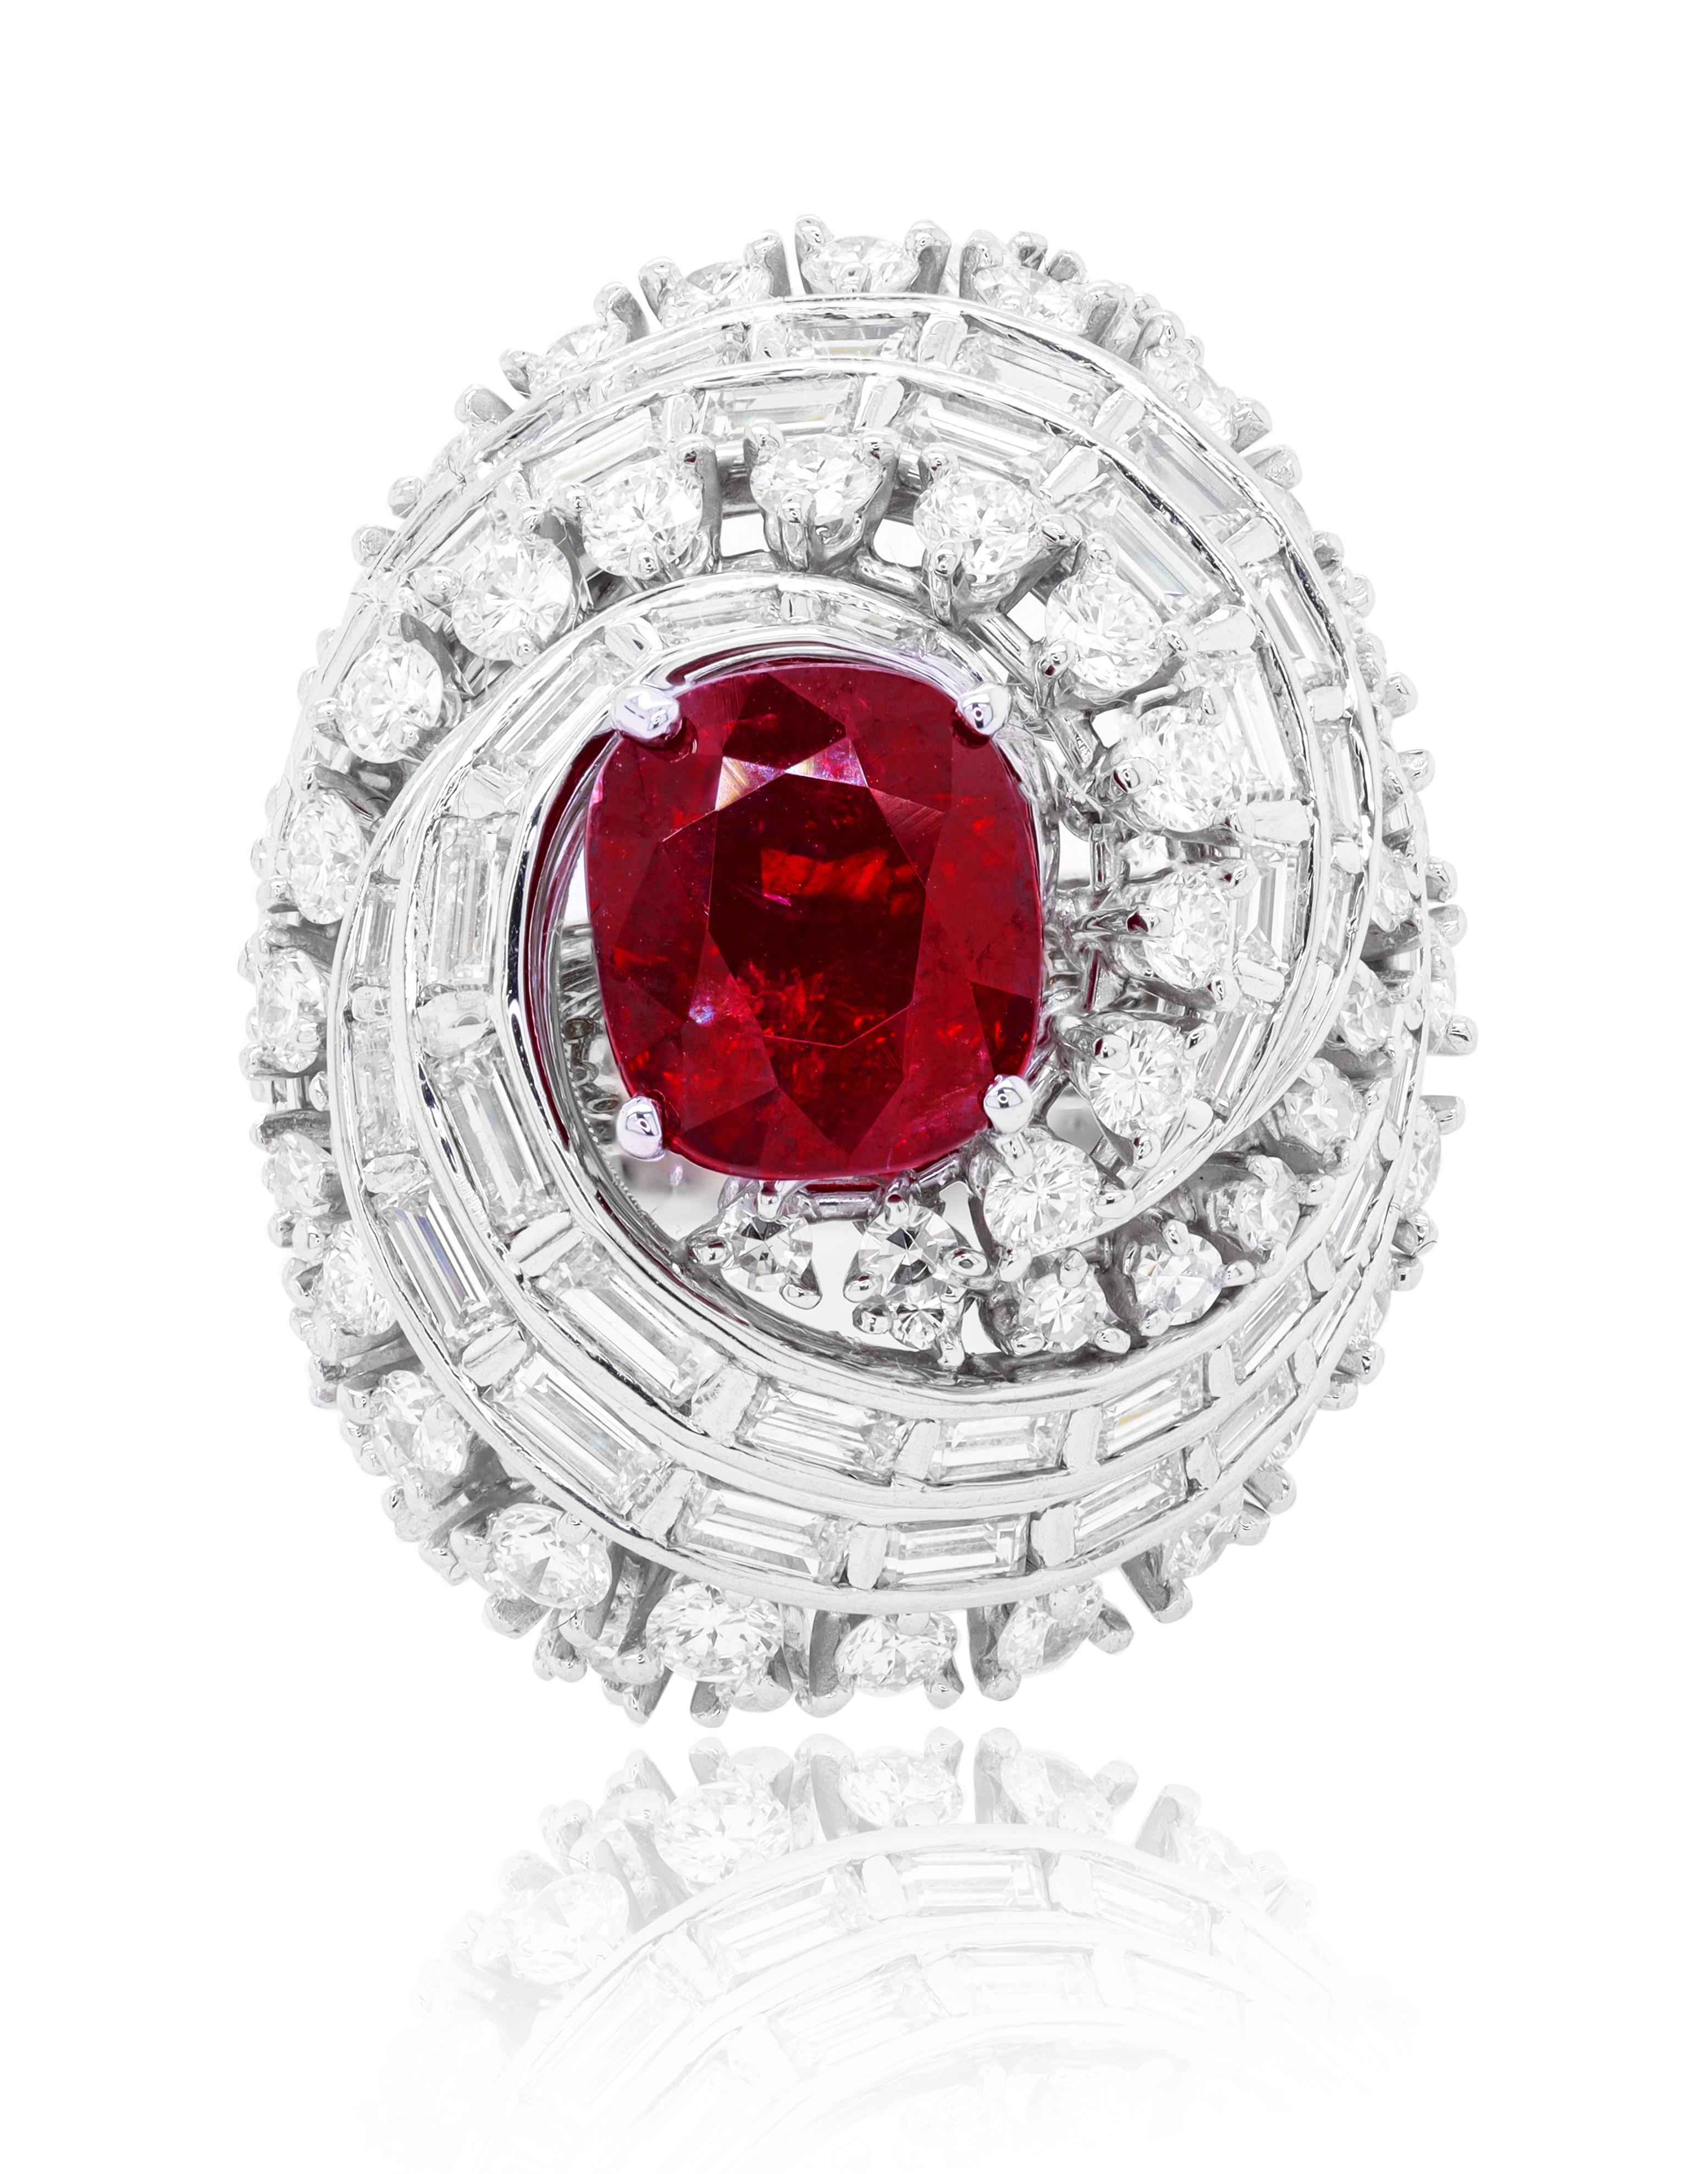 18ktwg Fashin Ring Center Stone Ruby 3.60cts And 6.00cts Diamonds Around
